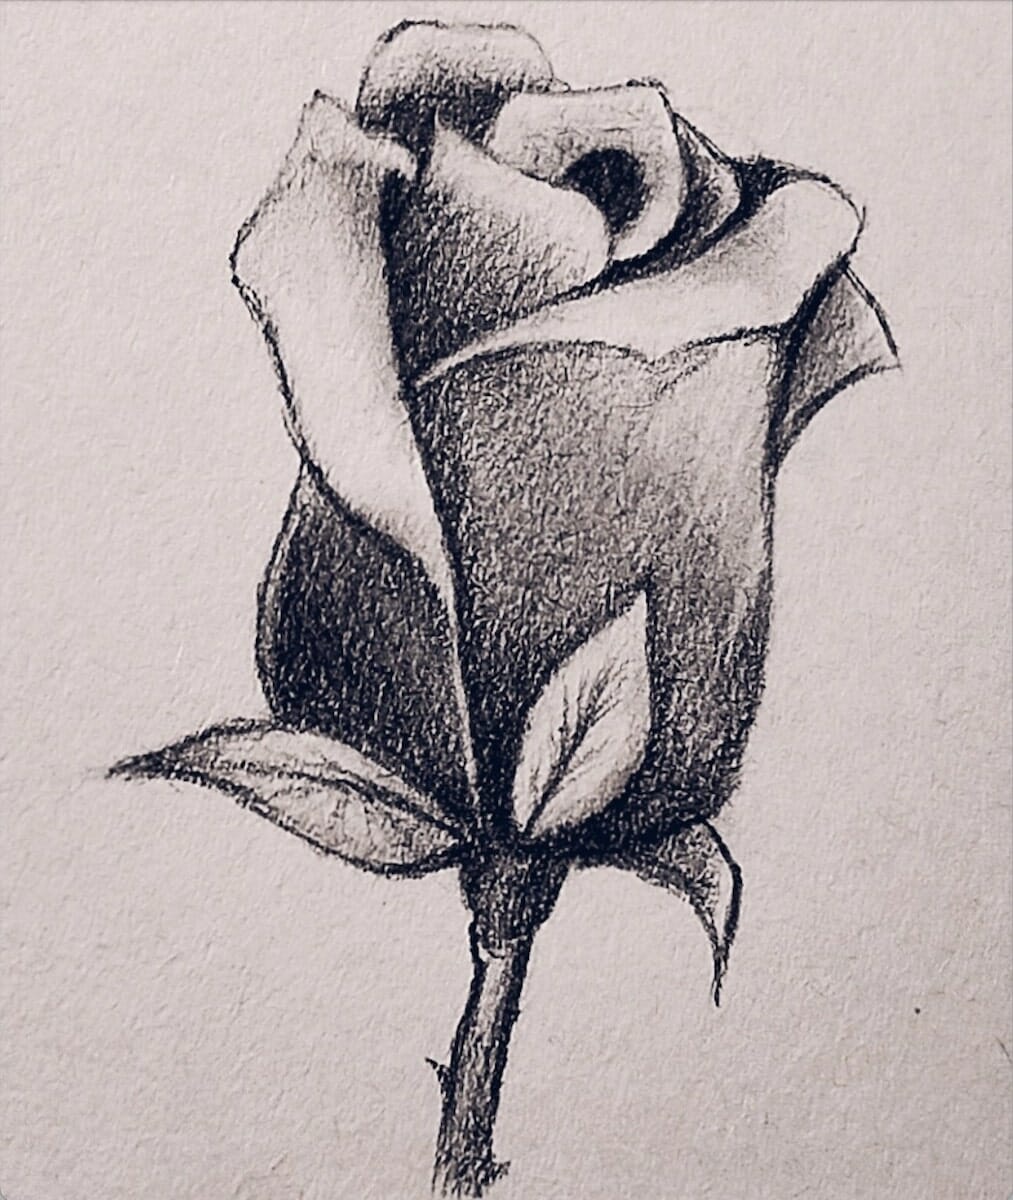 Learn How to Draw a Rose Easy Step-by-Step Video Tutorial